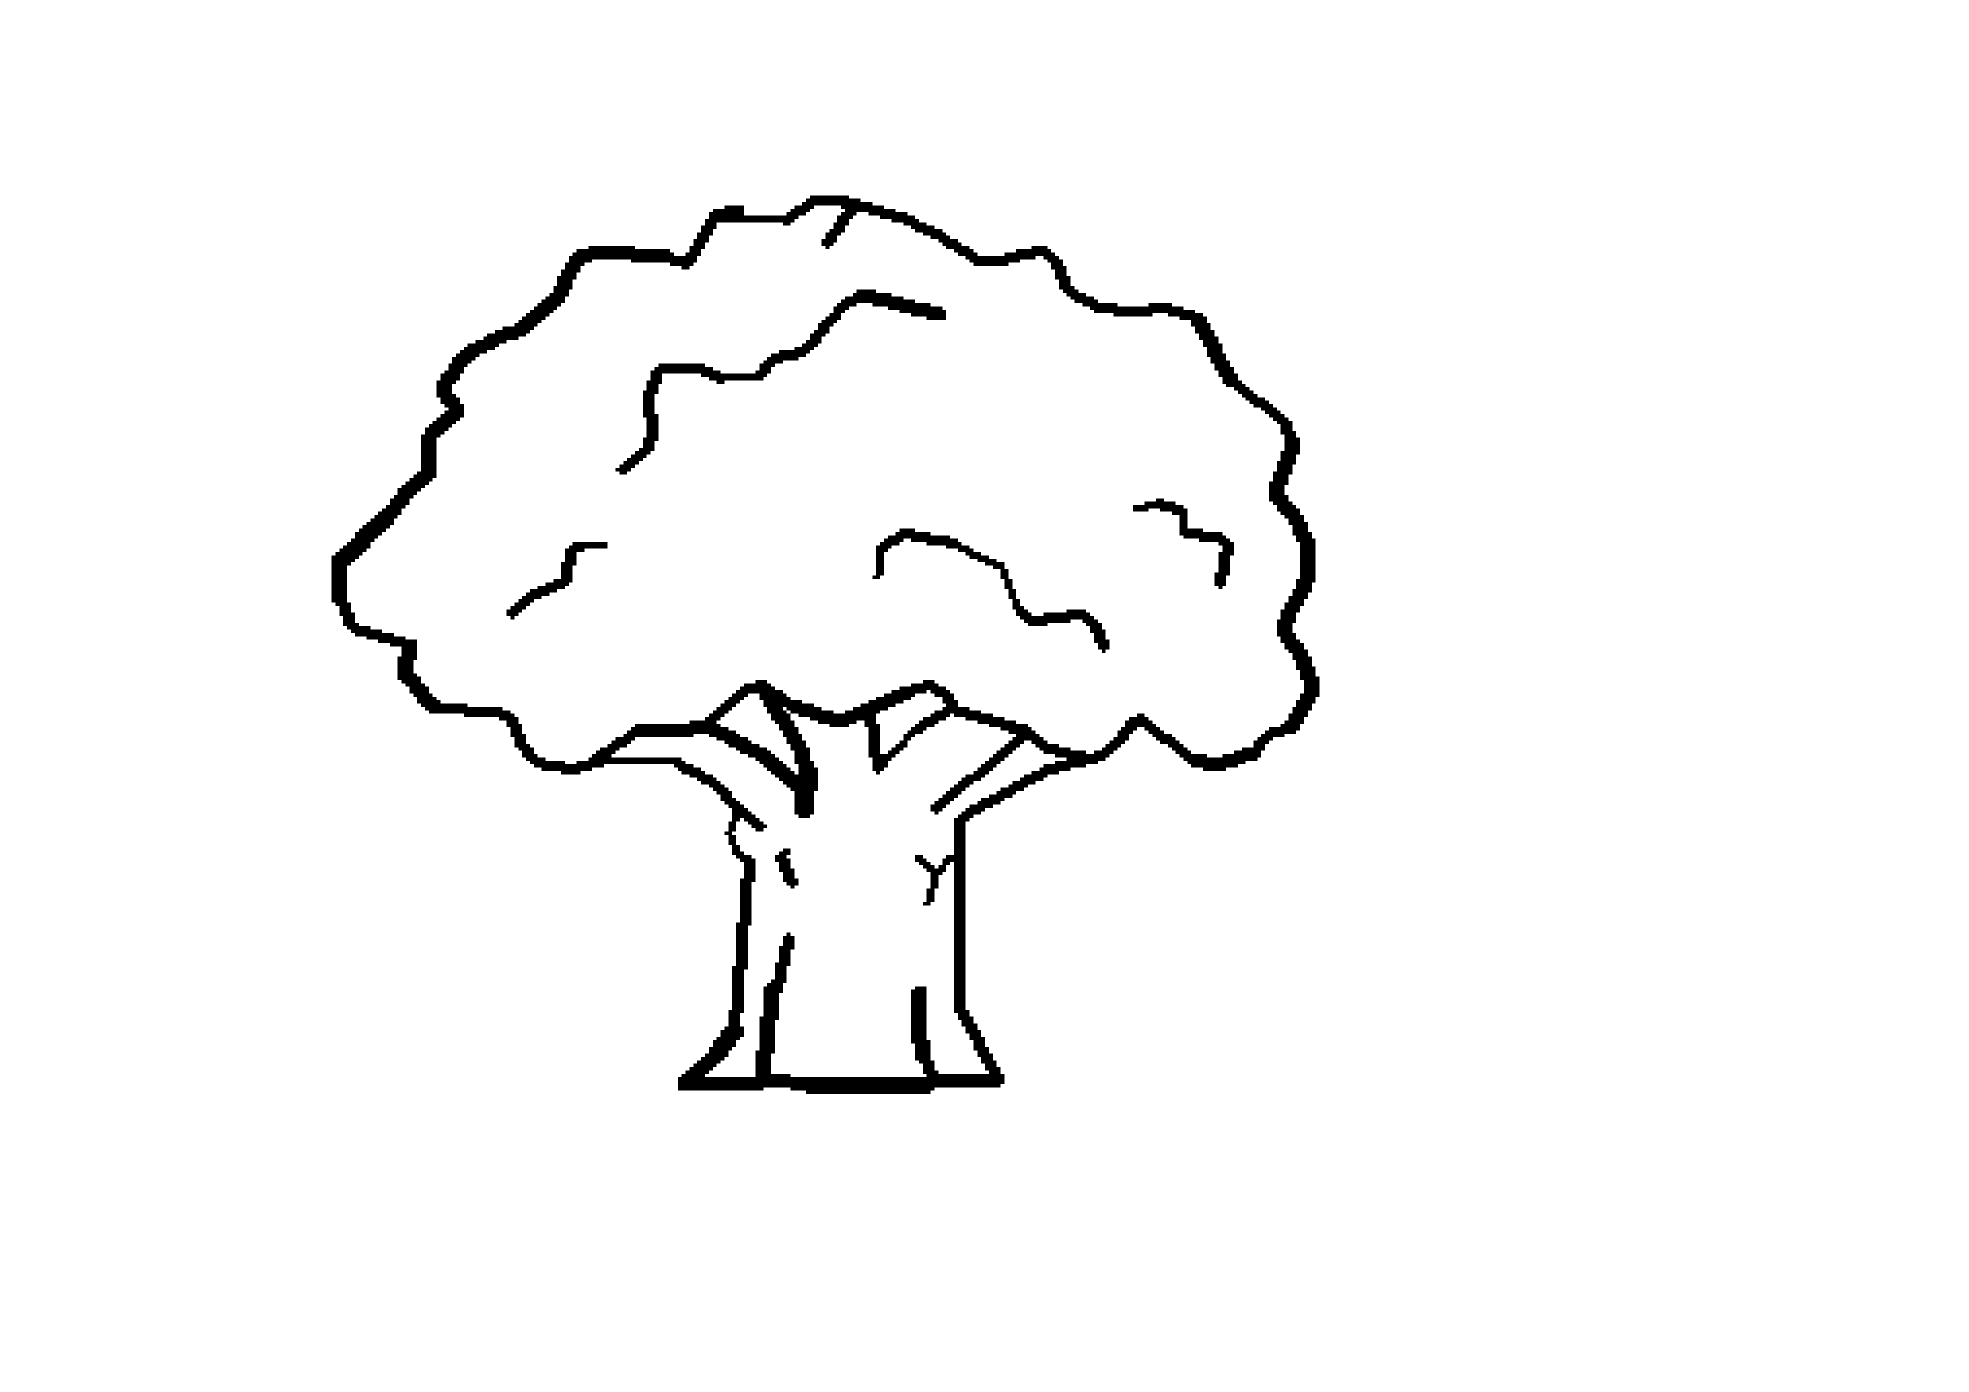 Clip Art: Tree Scalable Vector Graphics SVG ... - ClipArt Best ...